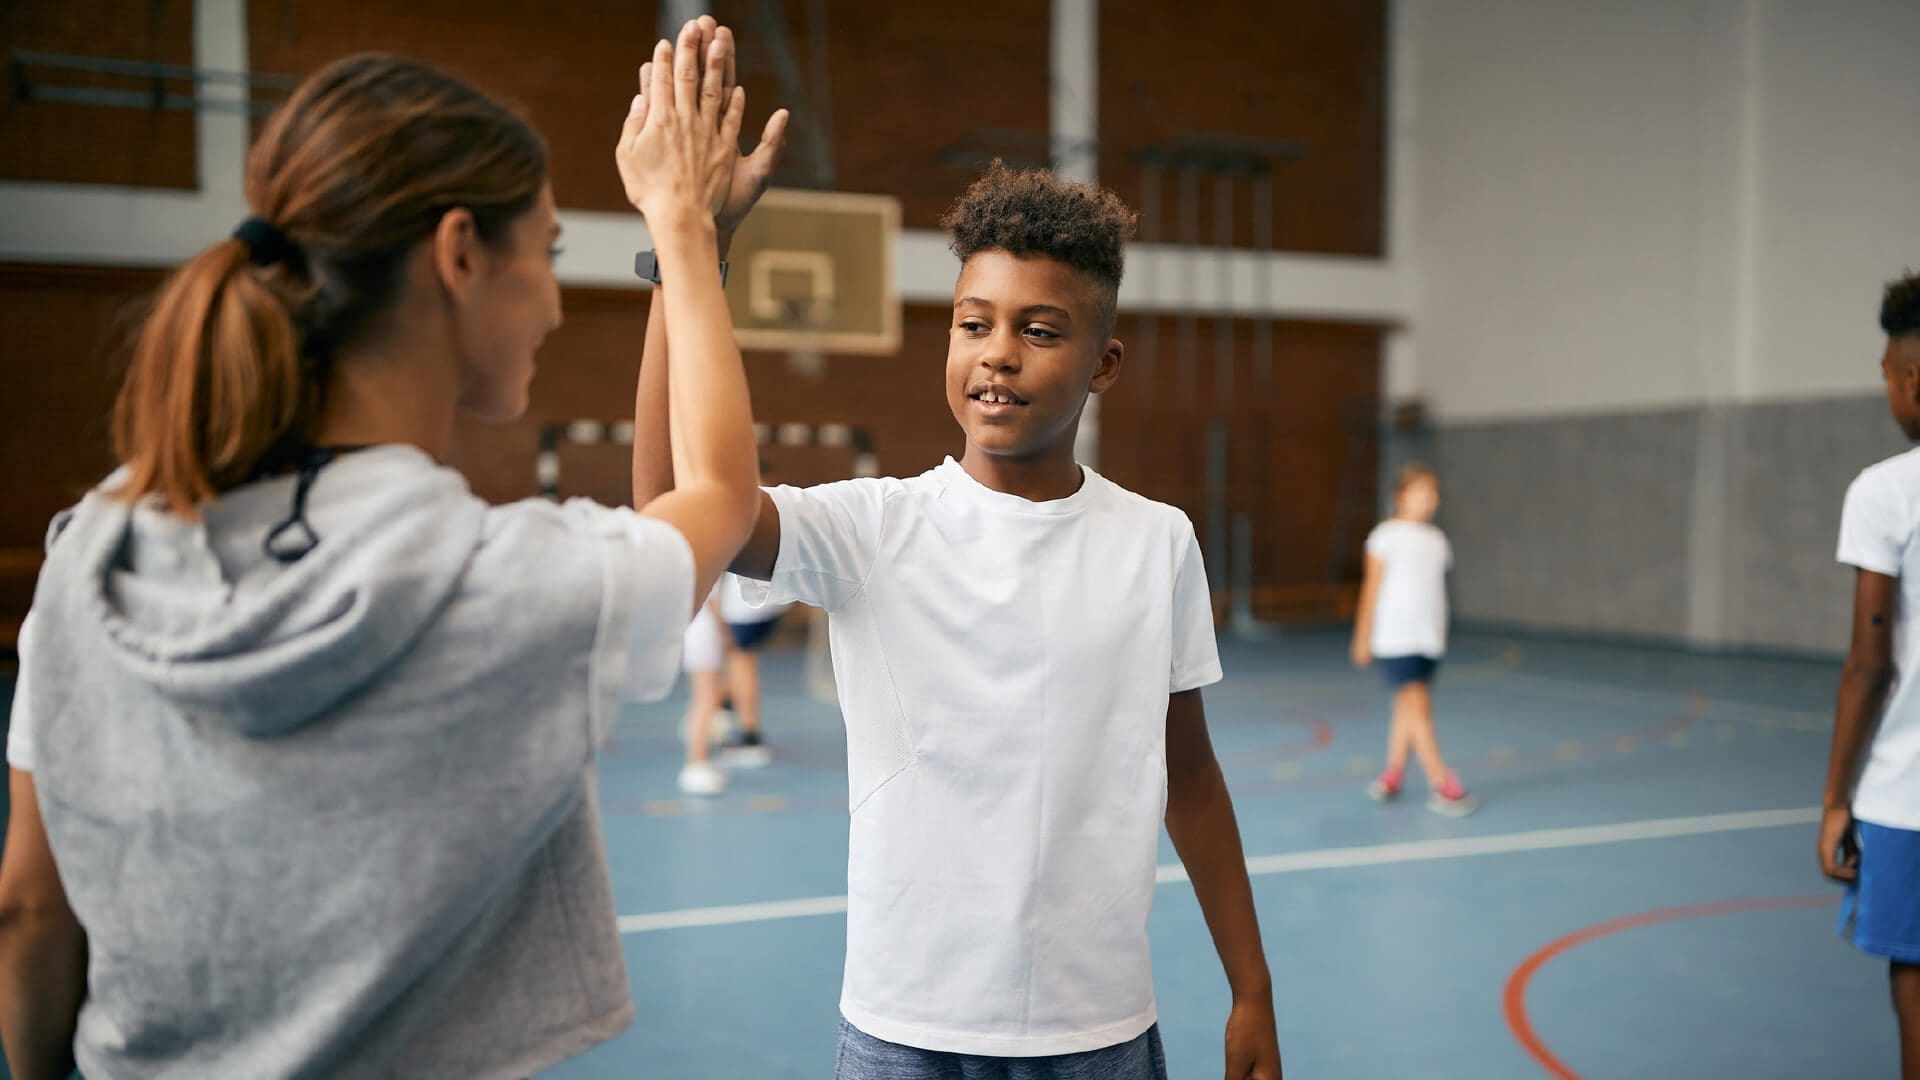 Five Ways to Motivate Students in Physical Education Class